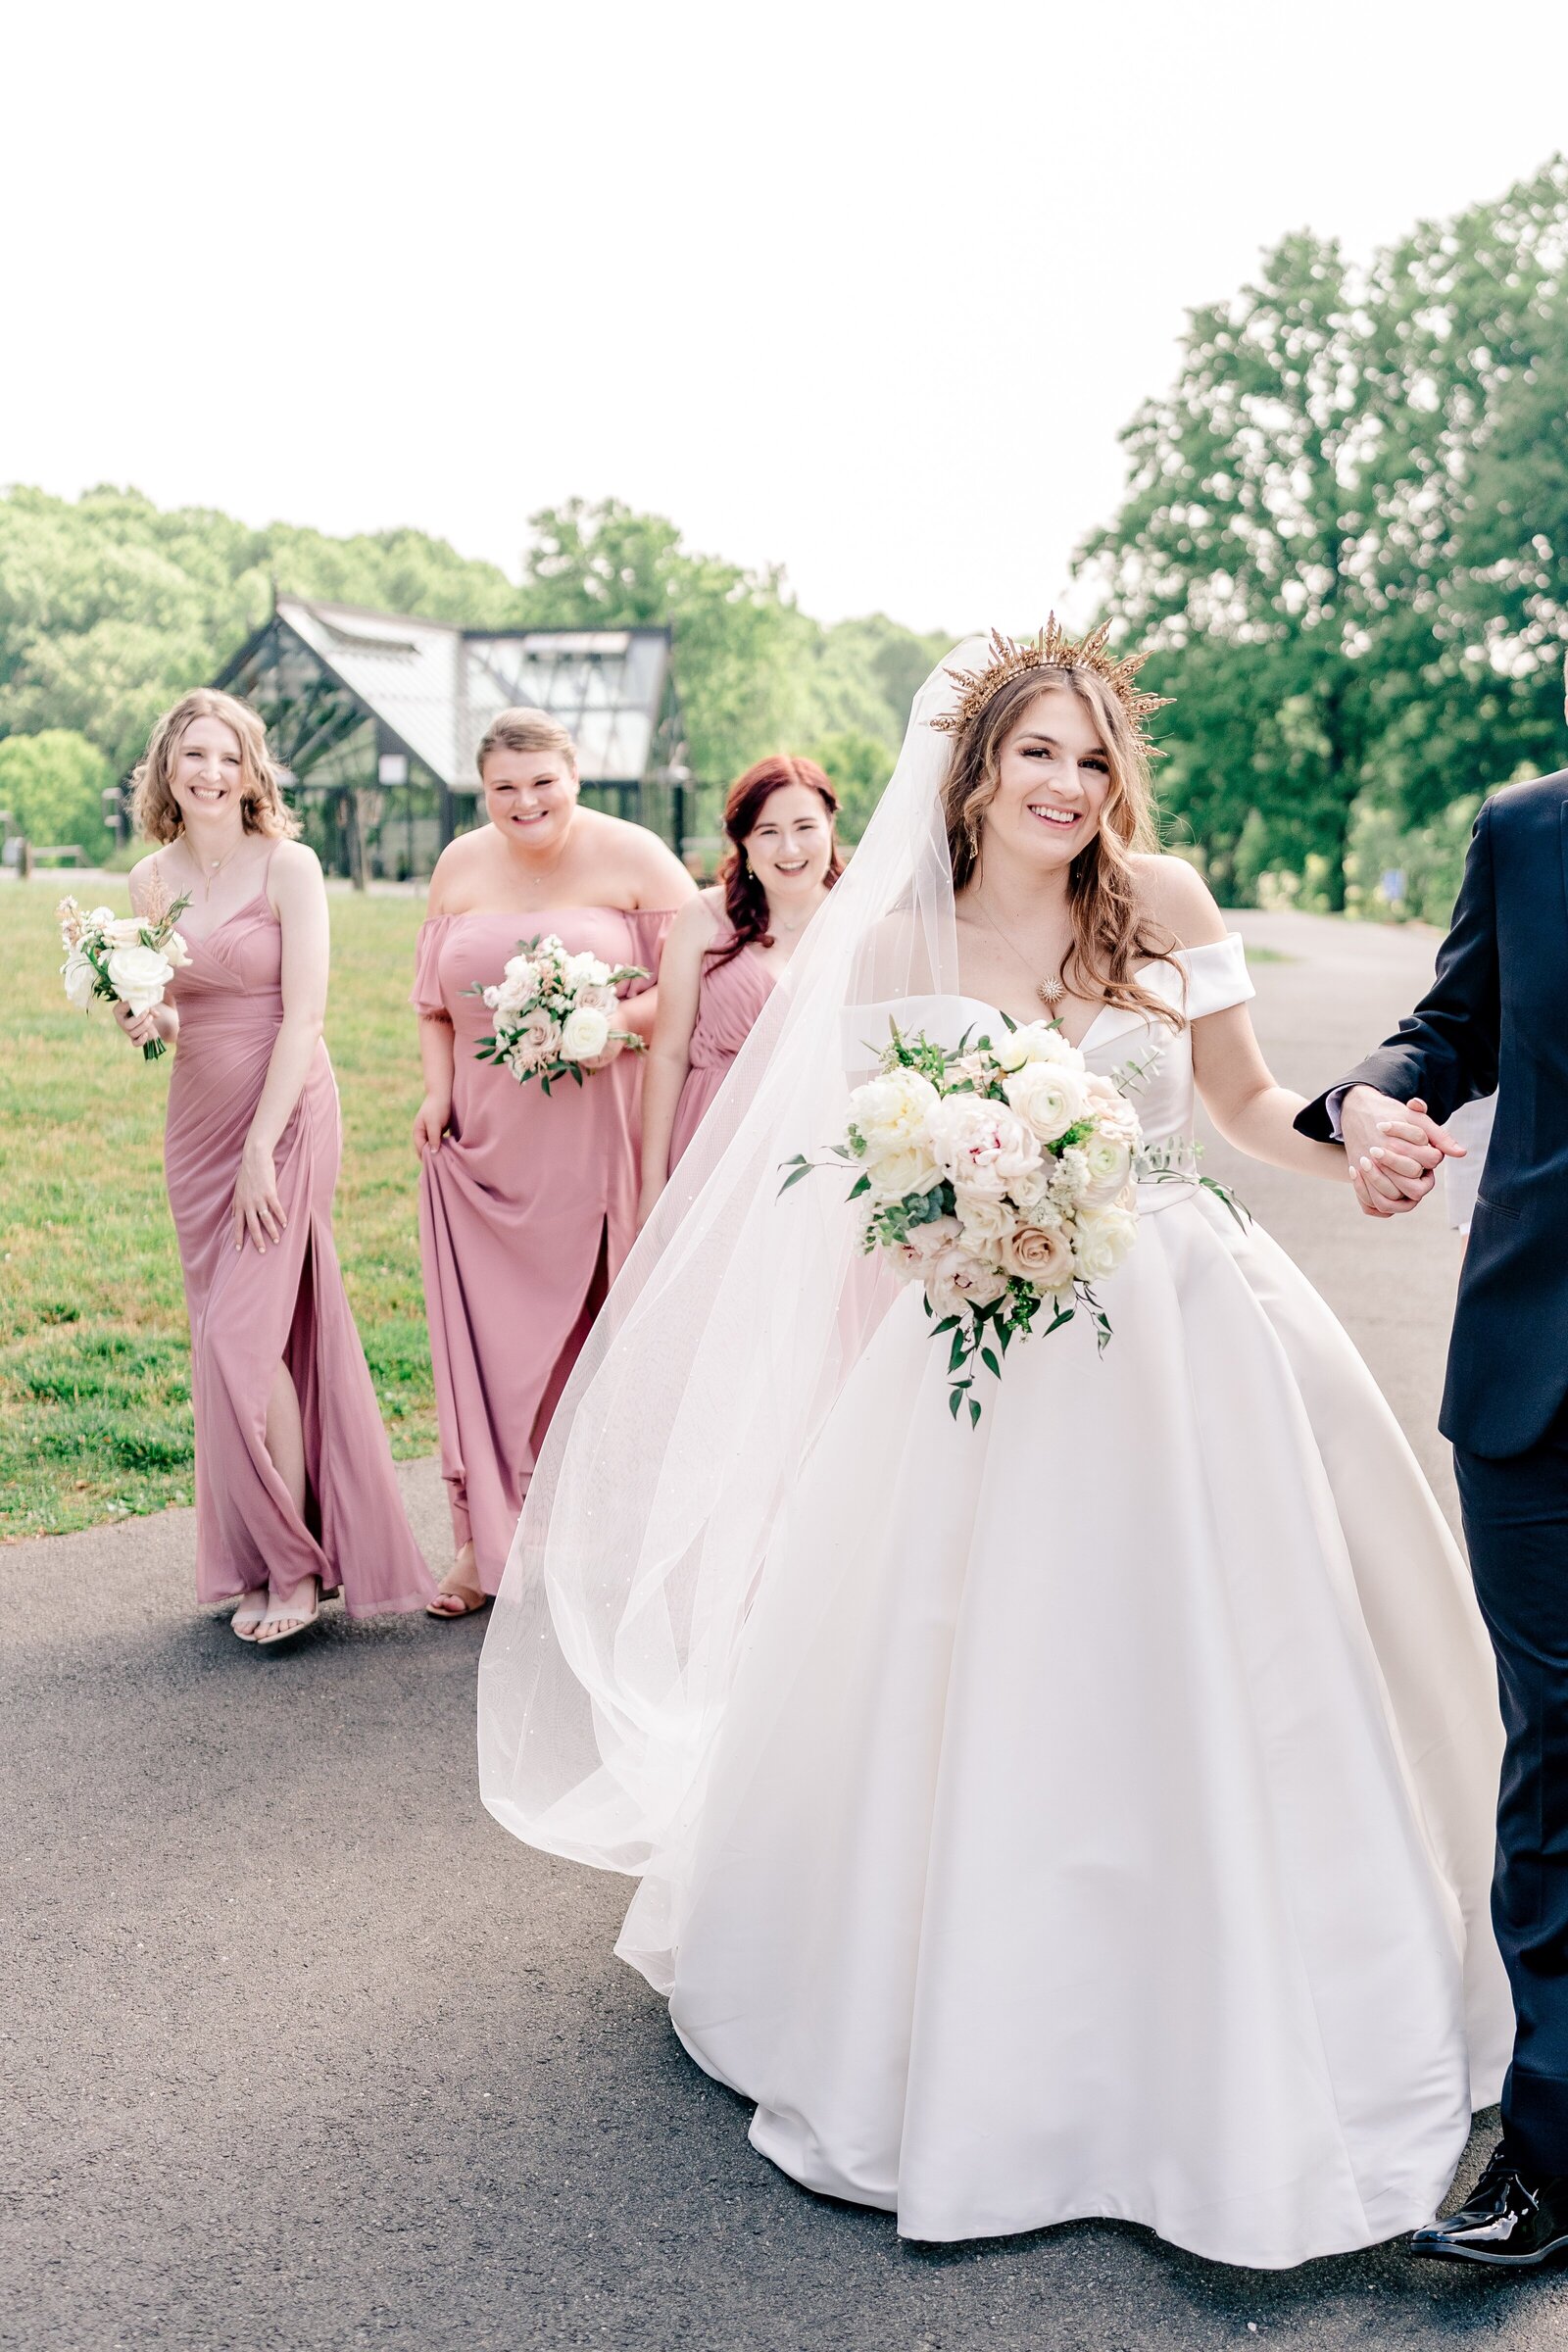 A bride and her bridesmaids as they walk together on her wedding at Meadowlark Botanical Gardens in Northern Virginia